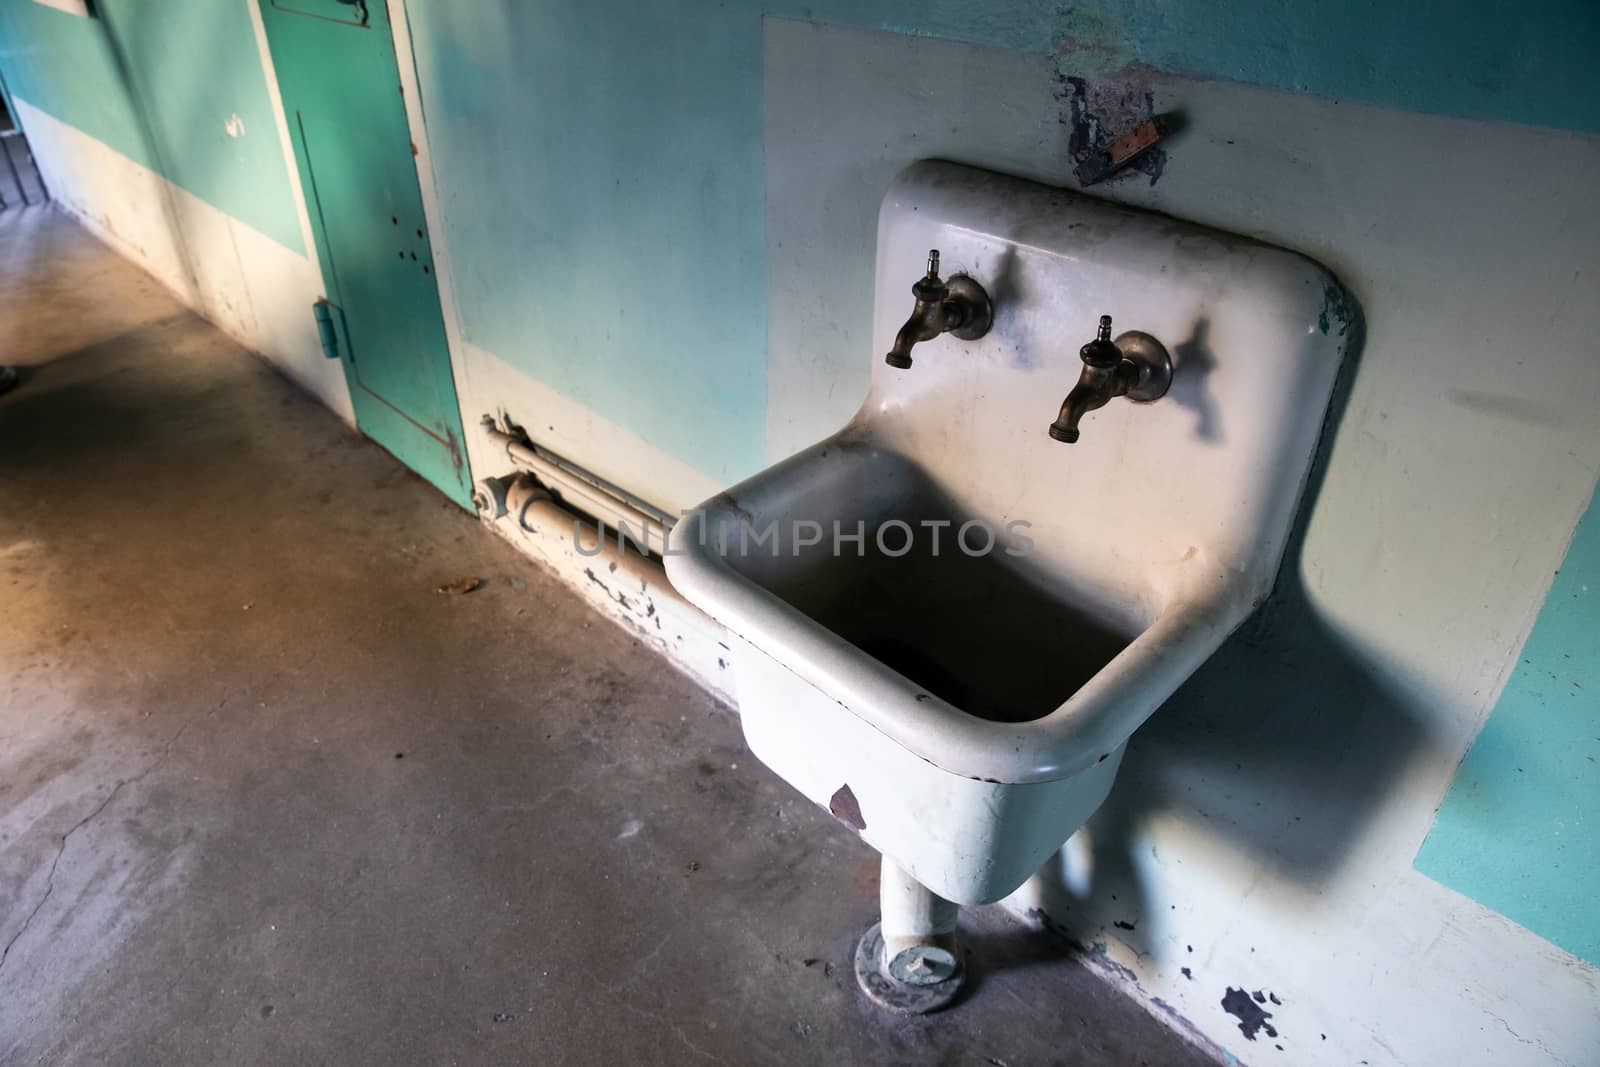 Vintage sink that is quite dirty